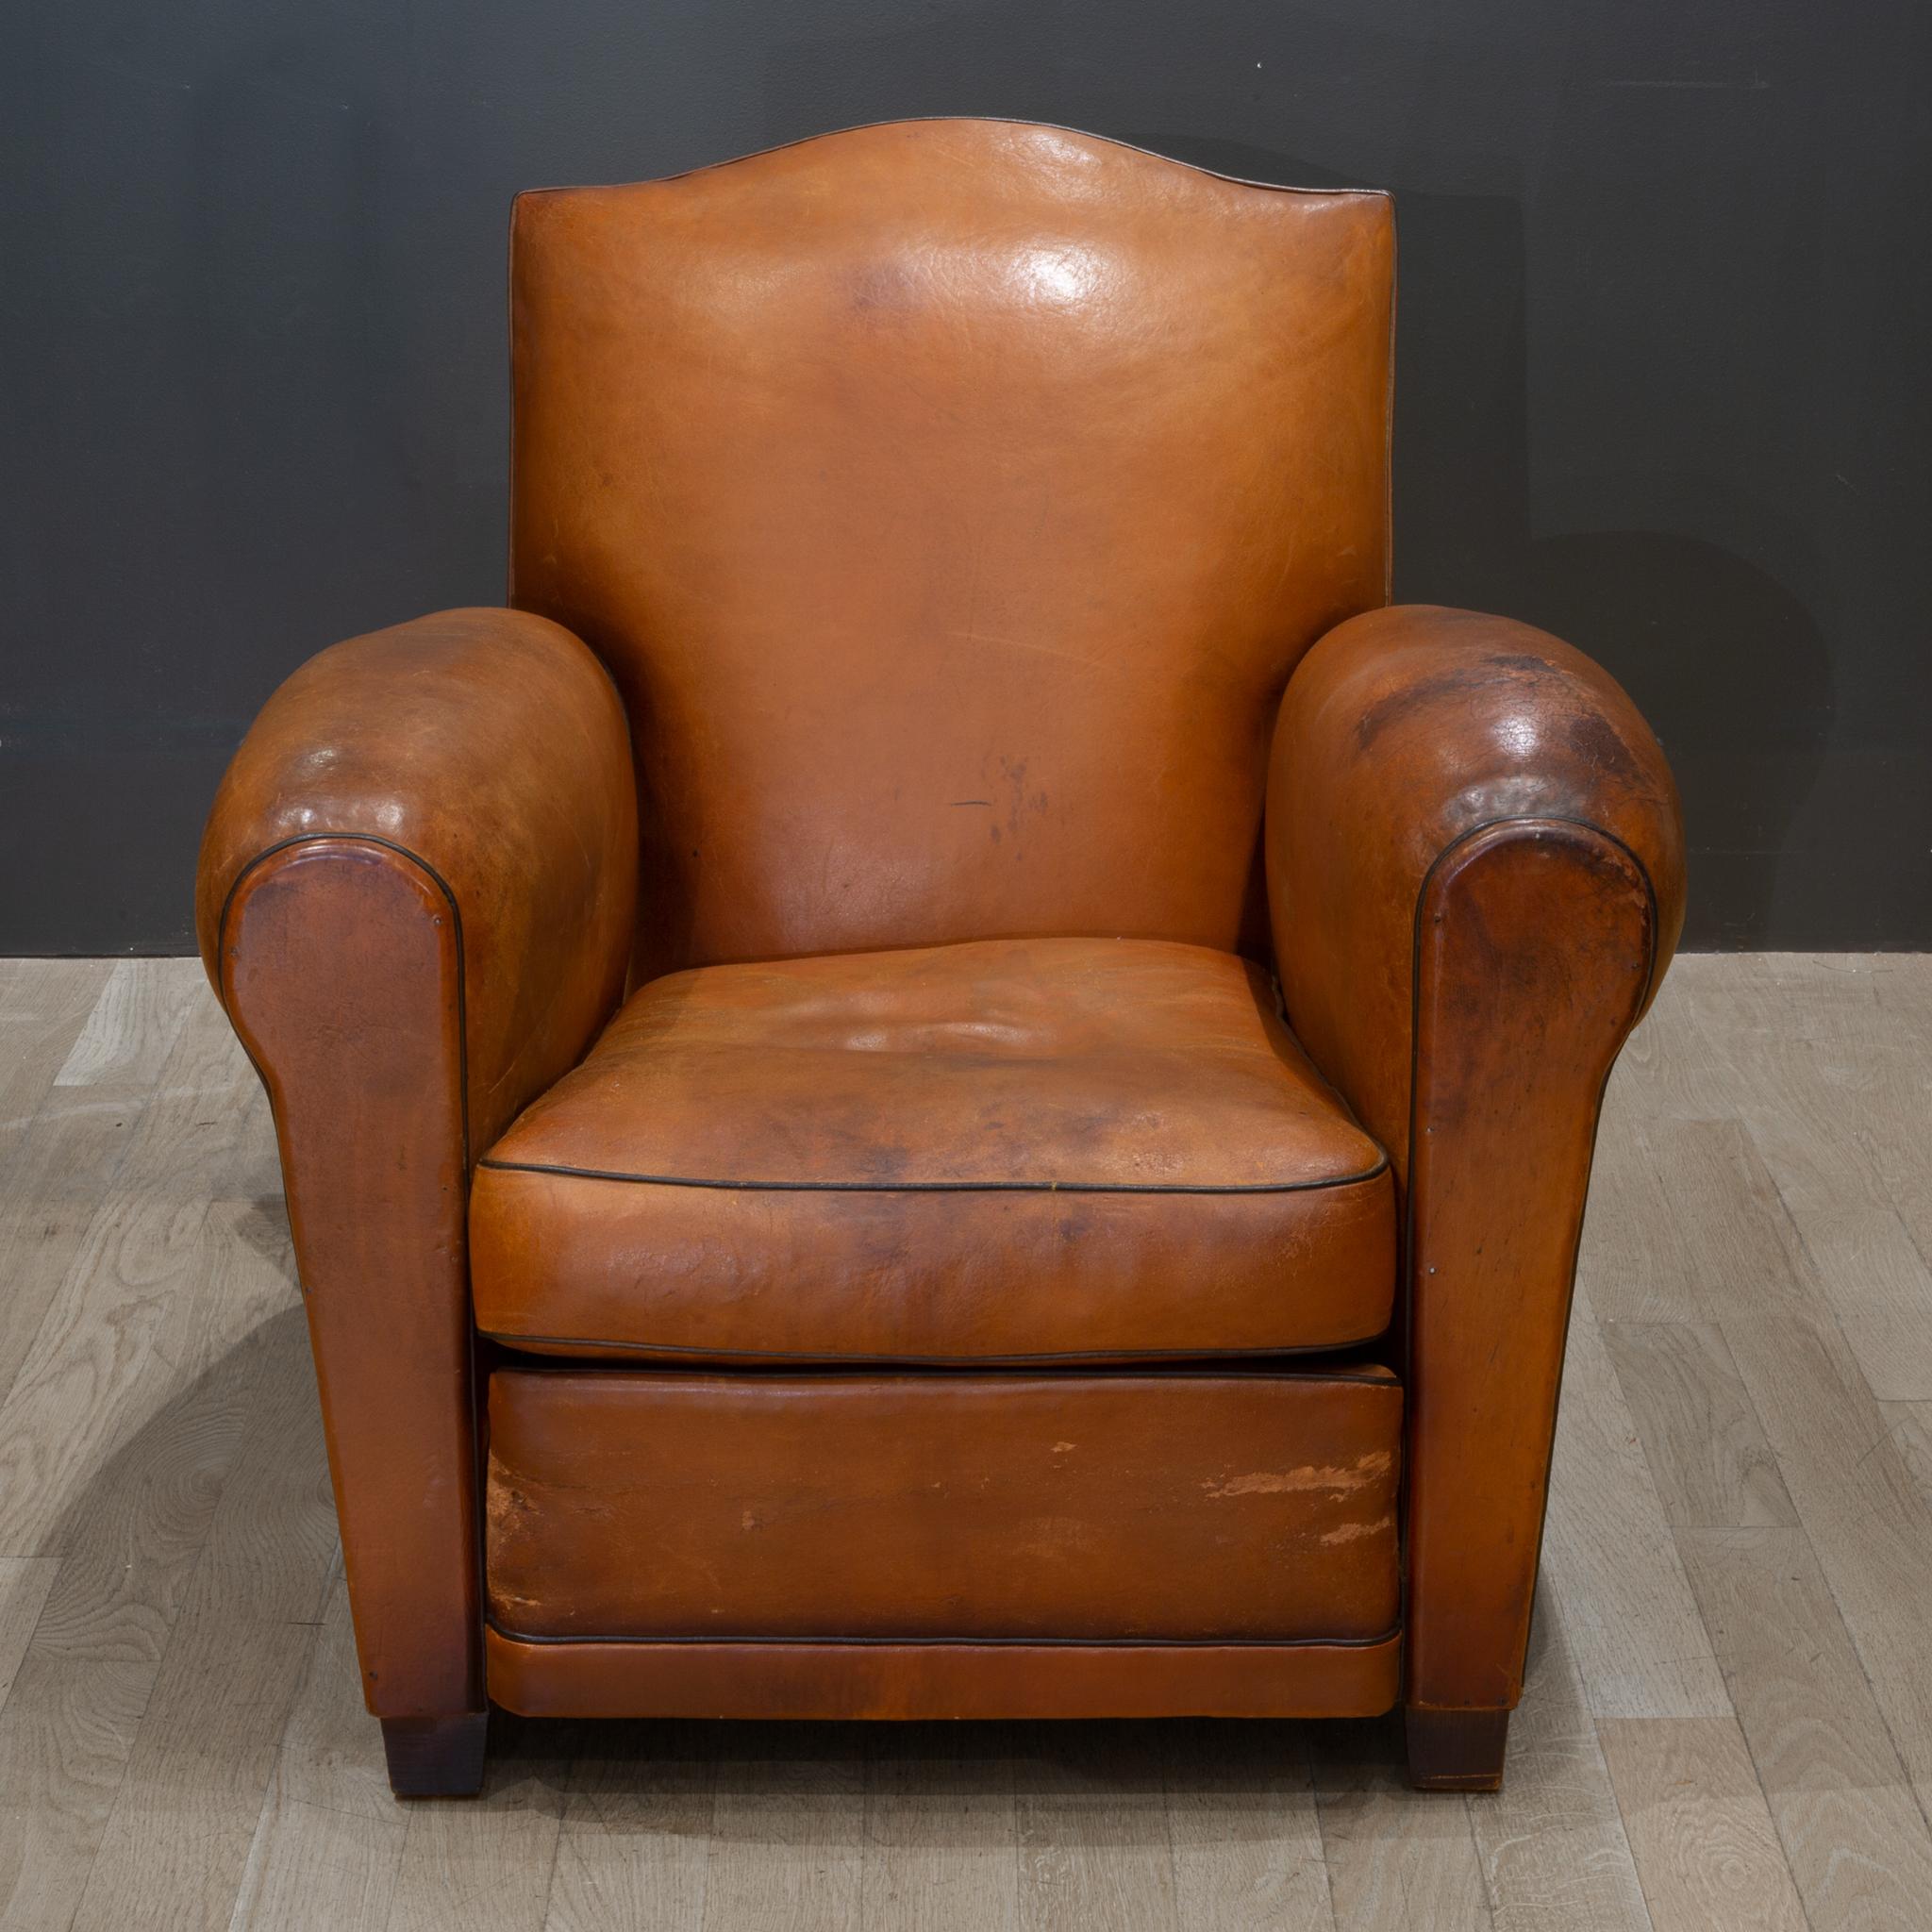 About

Early 20th century French sheep hide leather lounge chair with mustache top, riveted back, wooden feet, black piping and rounded armrest. Partially reconditioned. Very comfortable. This chair has retained its original finish with some